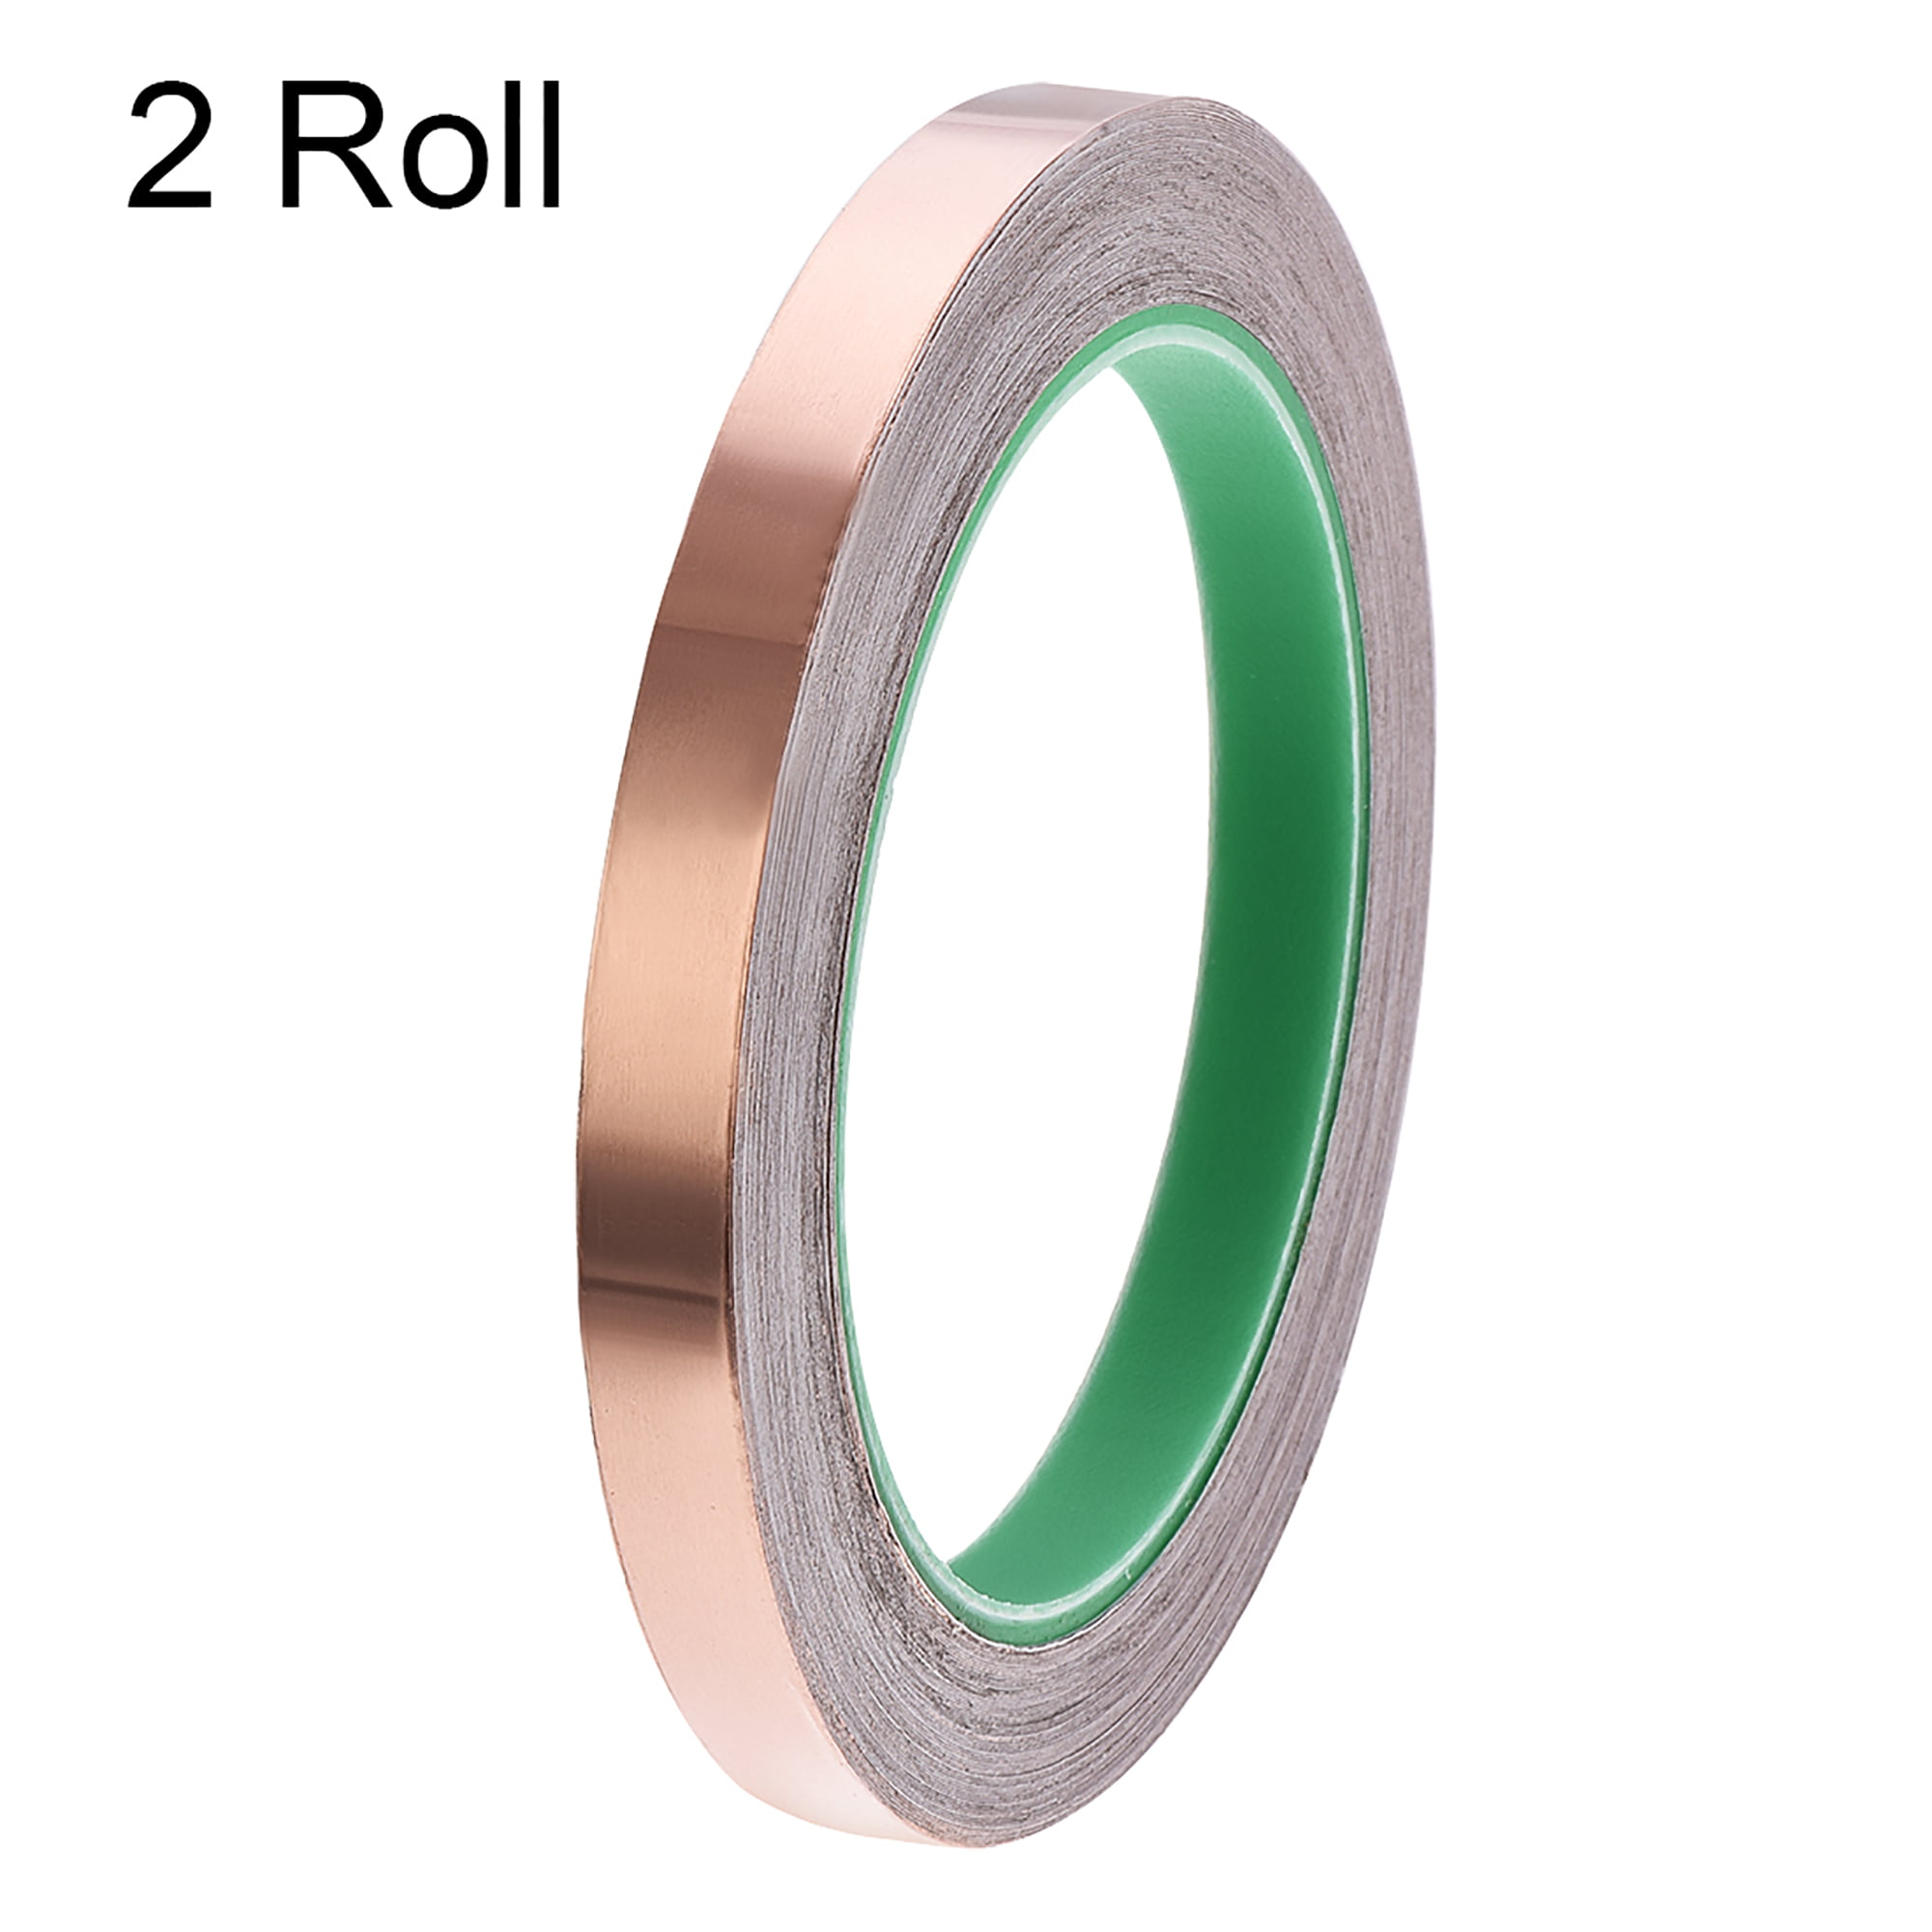 Double Sided Conductive Tape Copper Foil Tape 10mm x 20m for EMI Shielding 